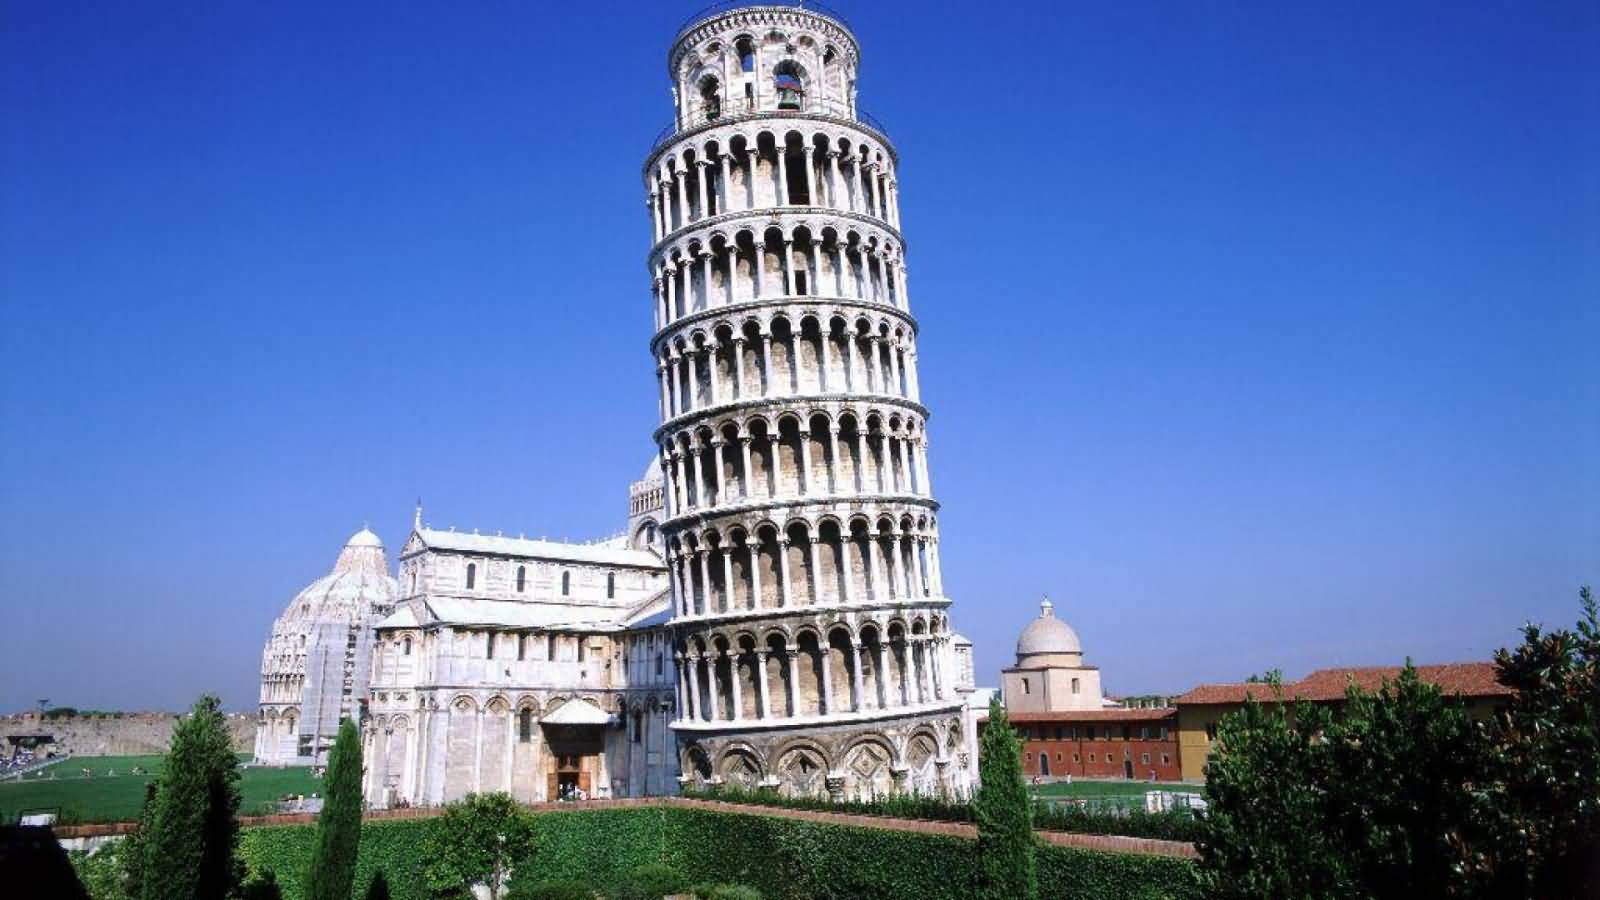 Beautiful Picture Of Leaning Tower of Pisa In Italy